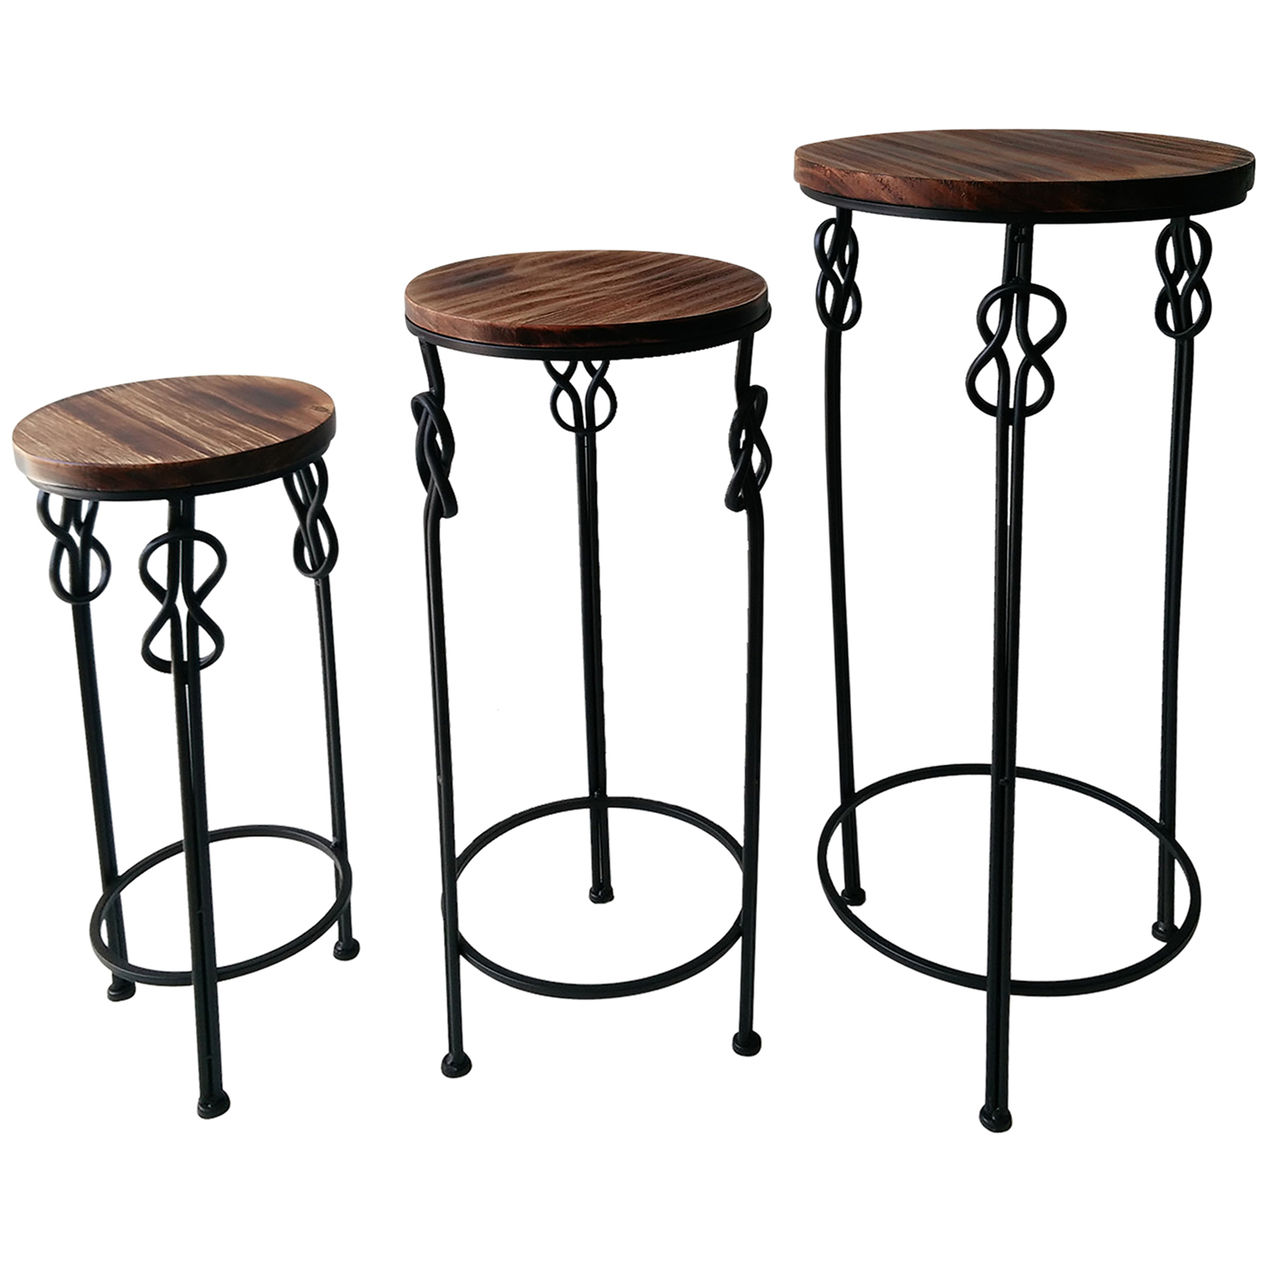 large round wood steel knot accent table home metal and amp outdoor storage ashley furniture wesling coffee legs for homemade runners long black marble top end tables accessory